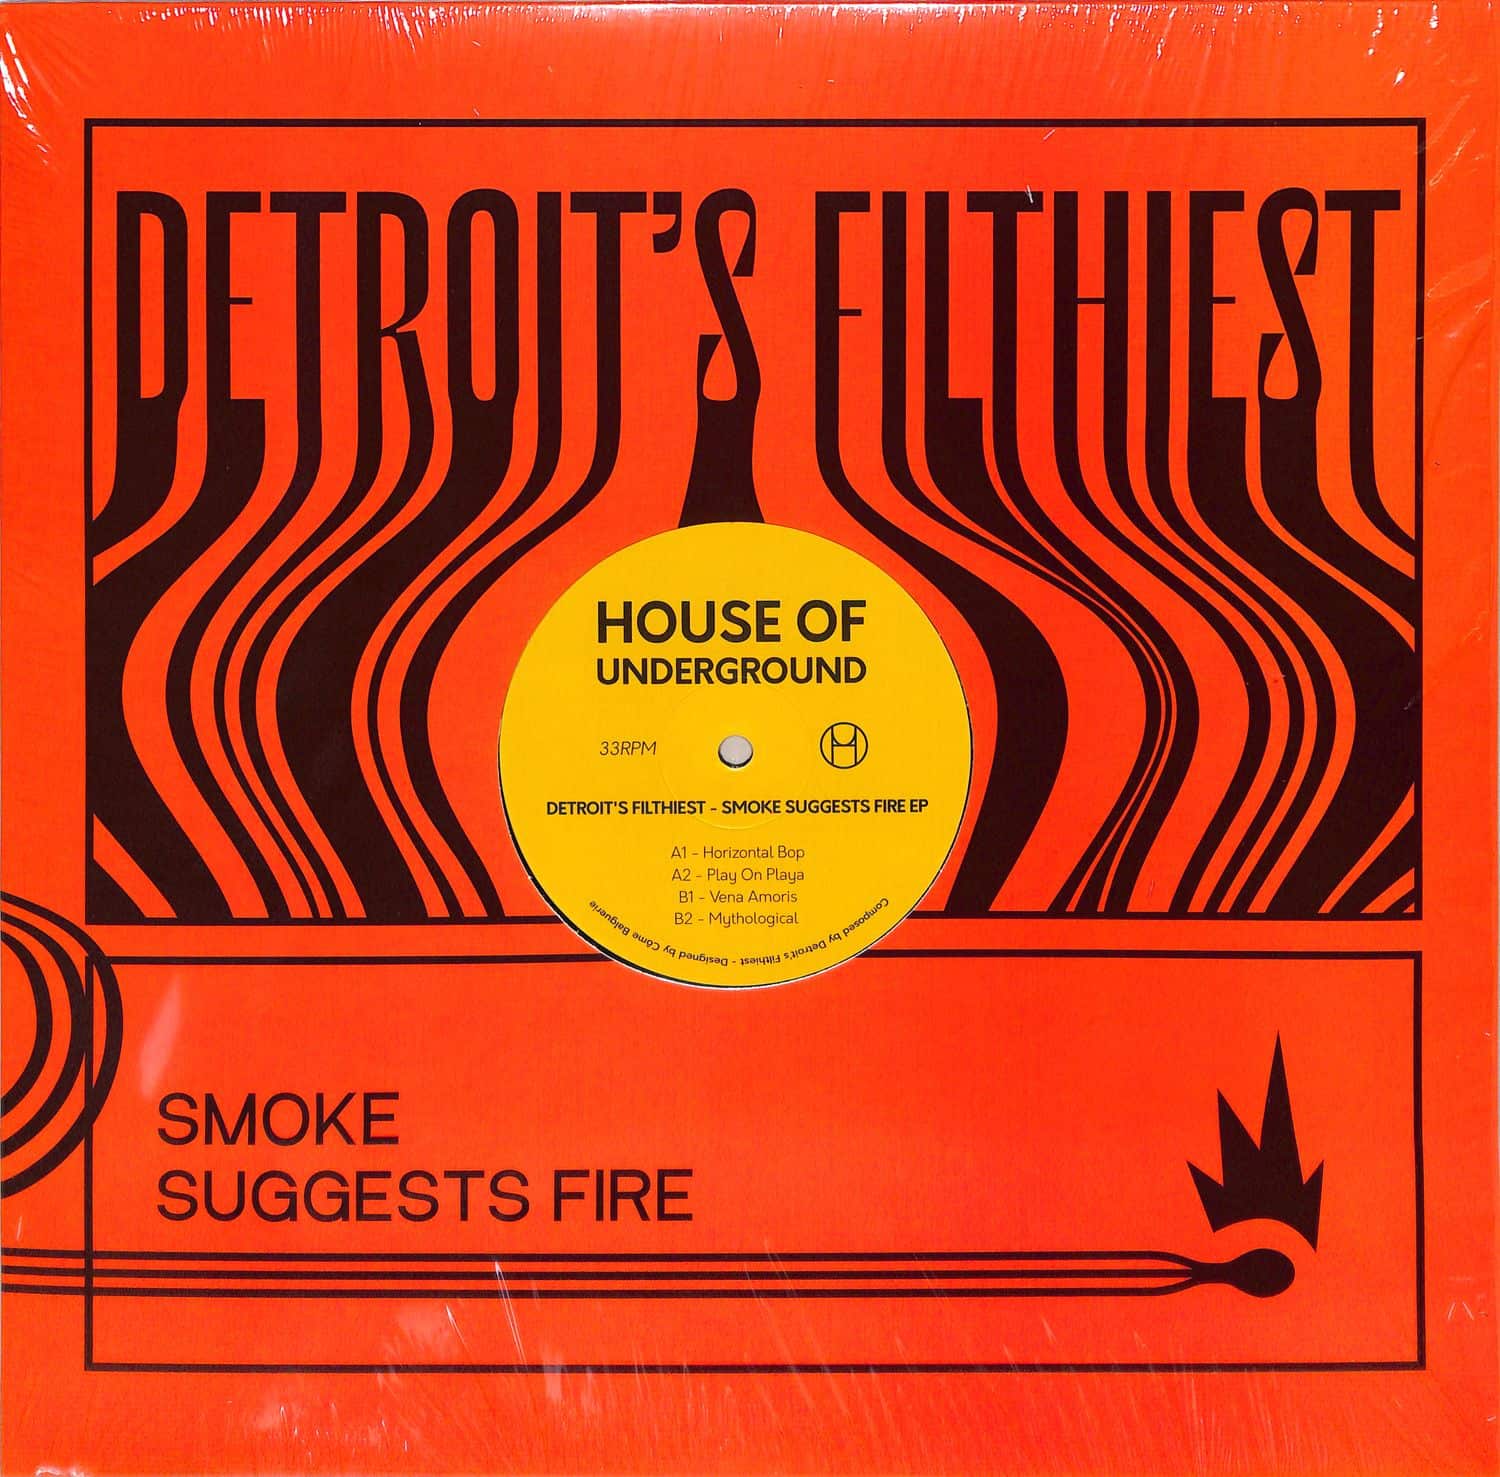 Detroits Filthiest - SMOKE SUGGESTS FIRE EP